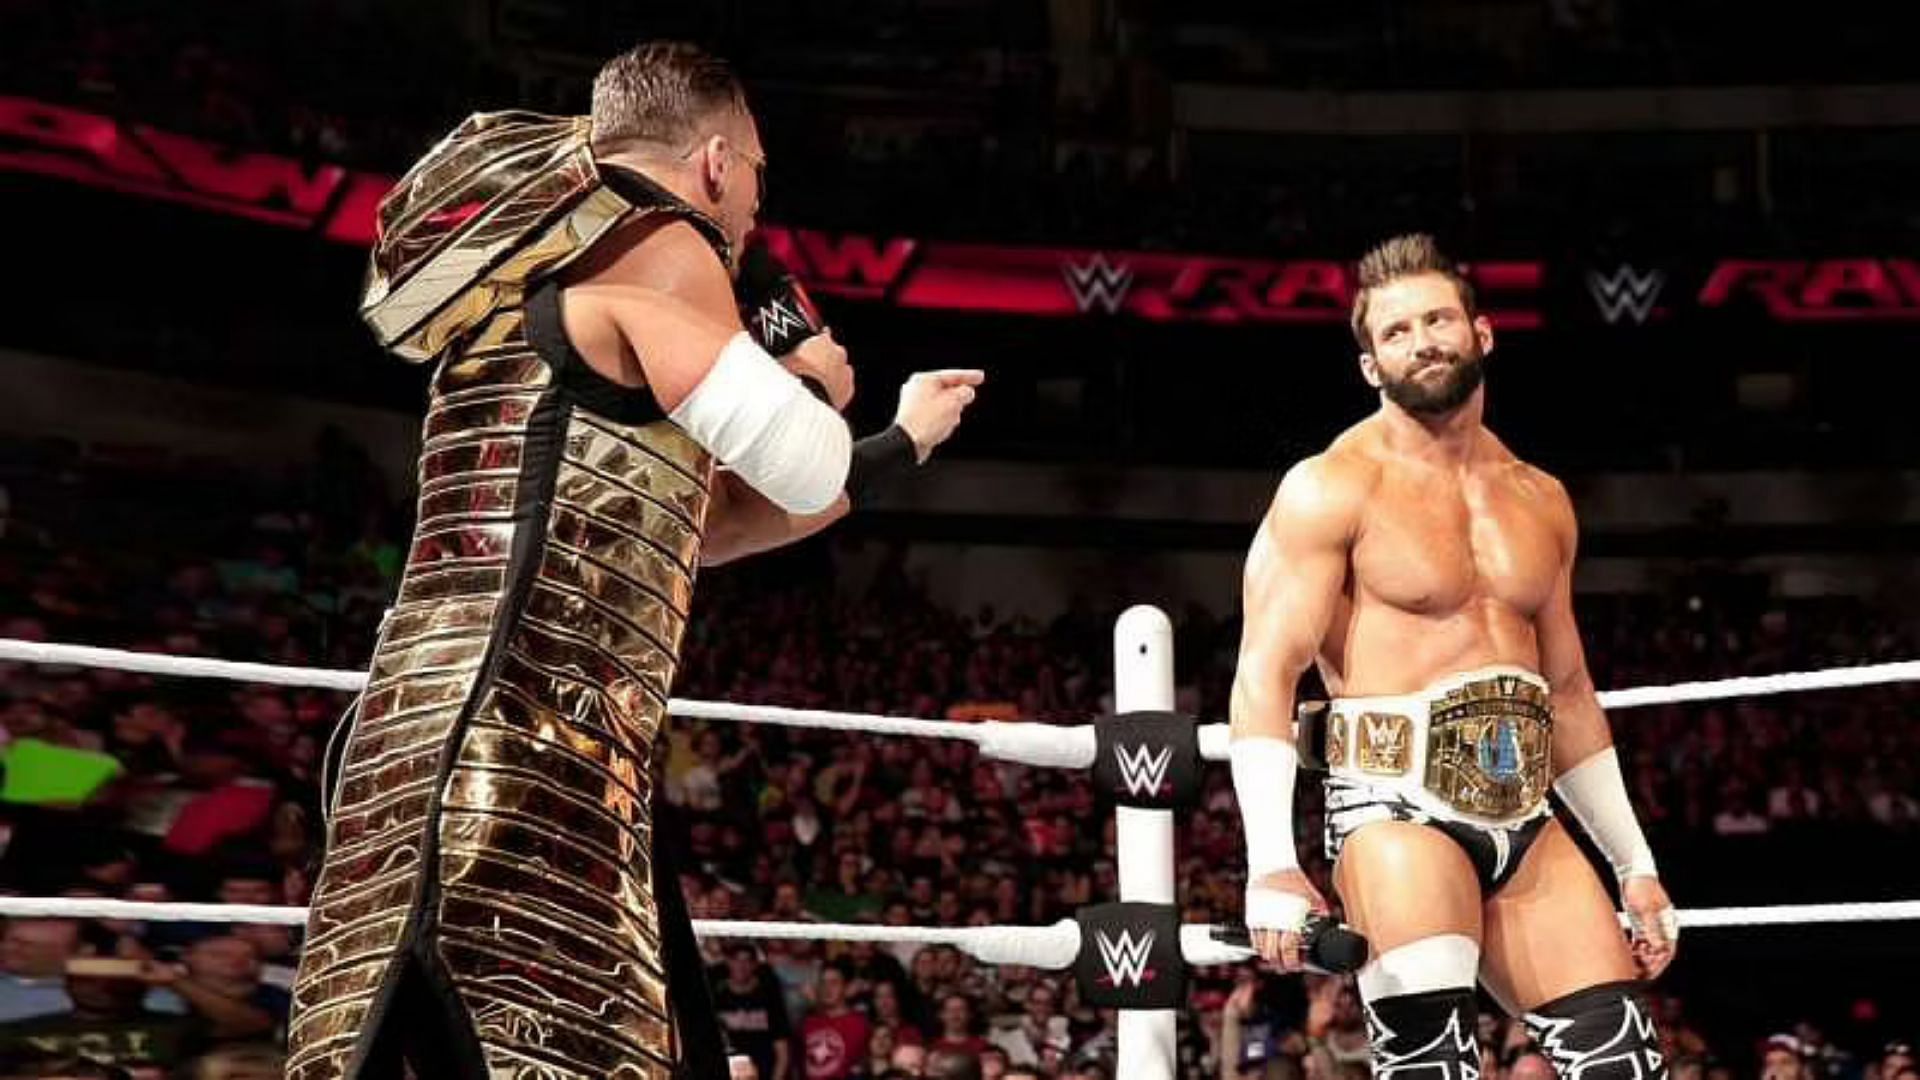 Zack Ryder is also good friends with Dolph Ziggler